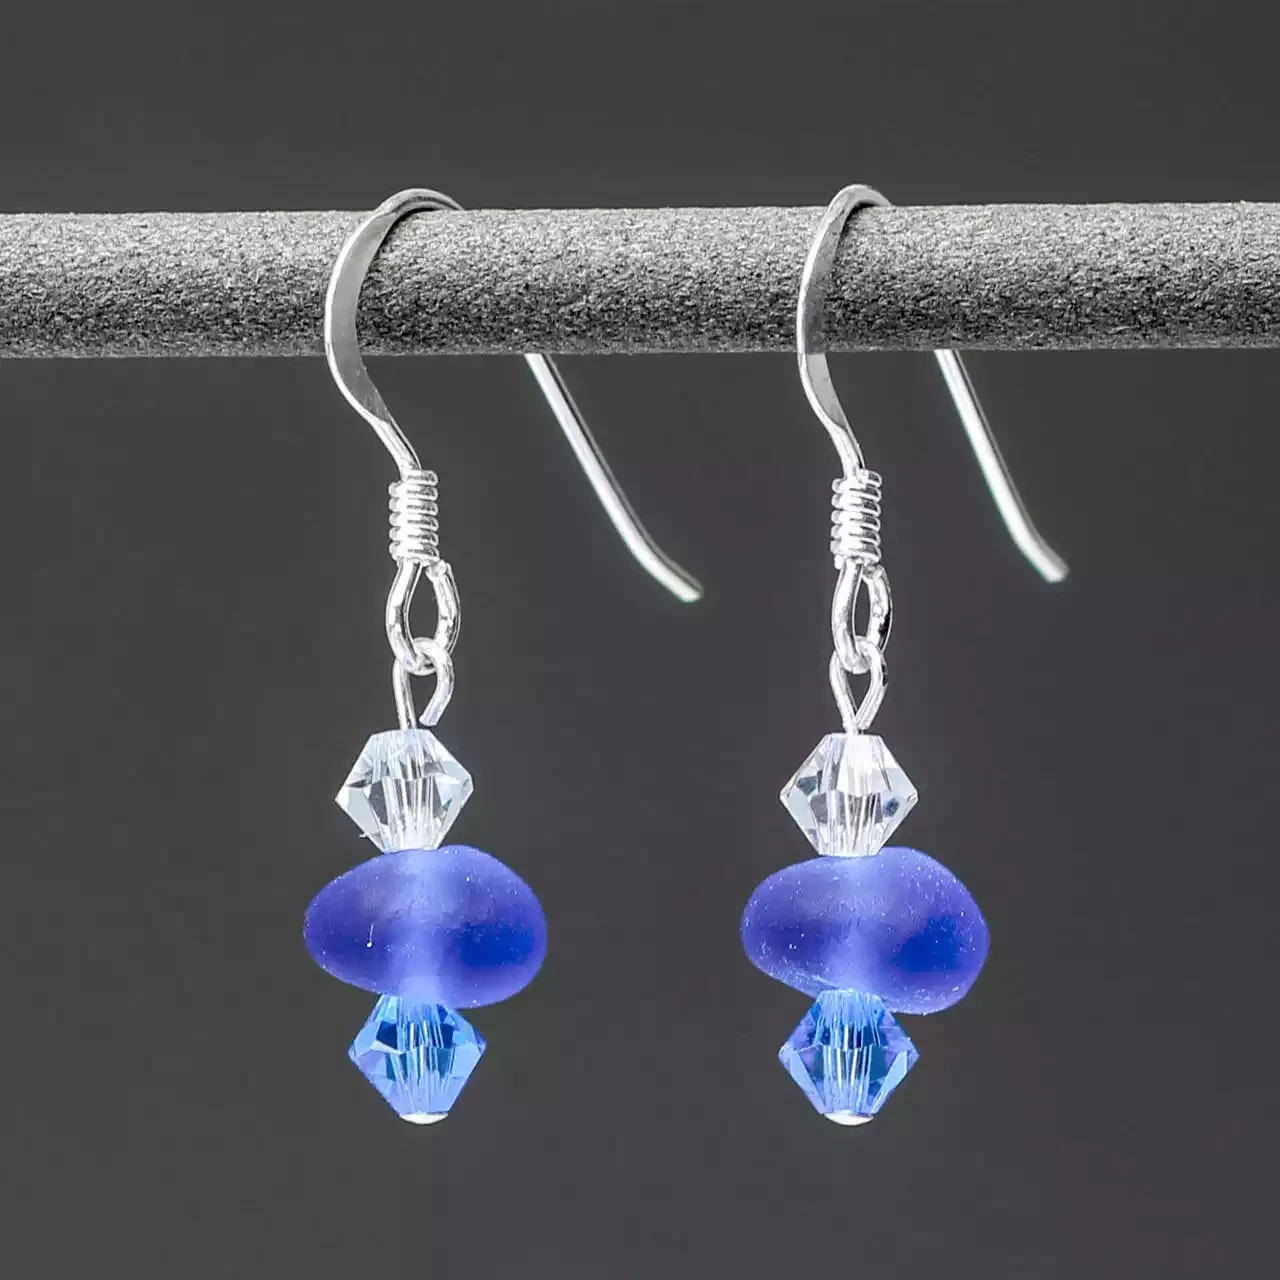 Sea Glass Pebble and Glass Beads Drop Earrings - Blue by Gaynor Hebden-Smith